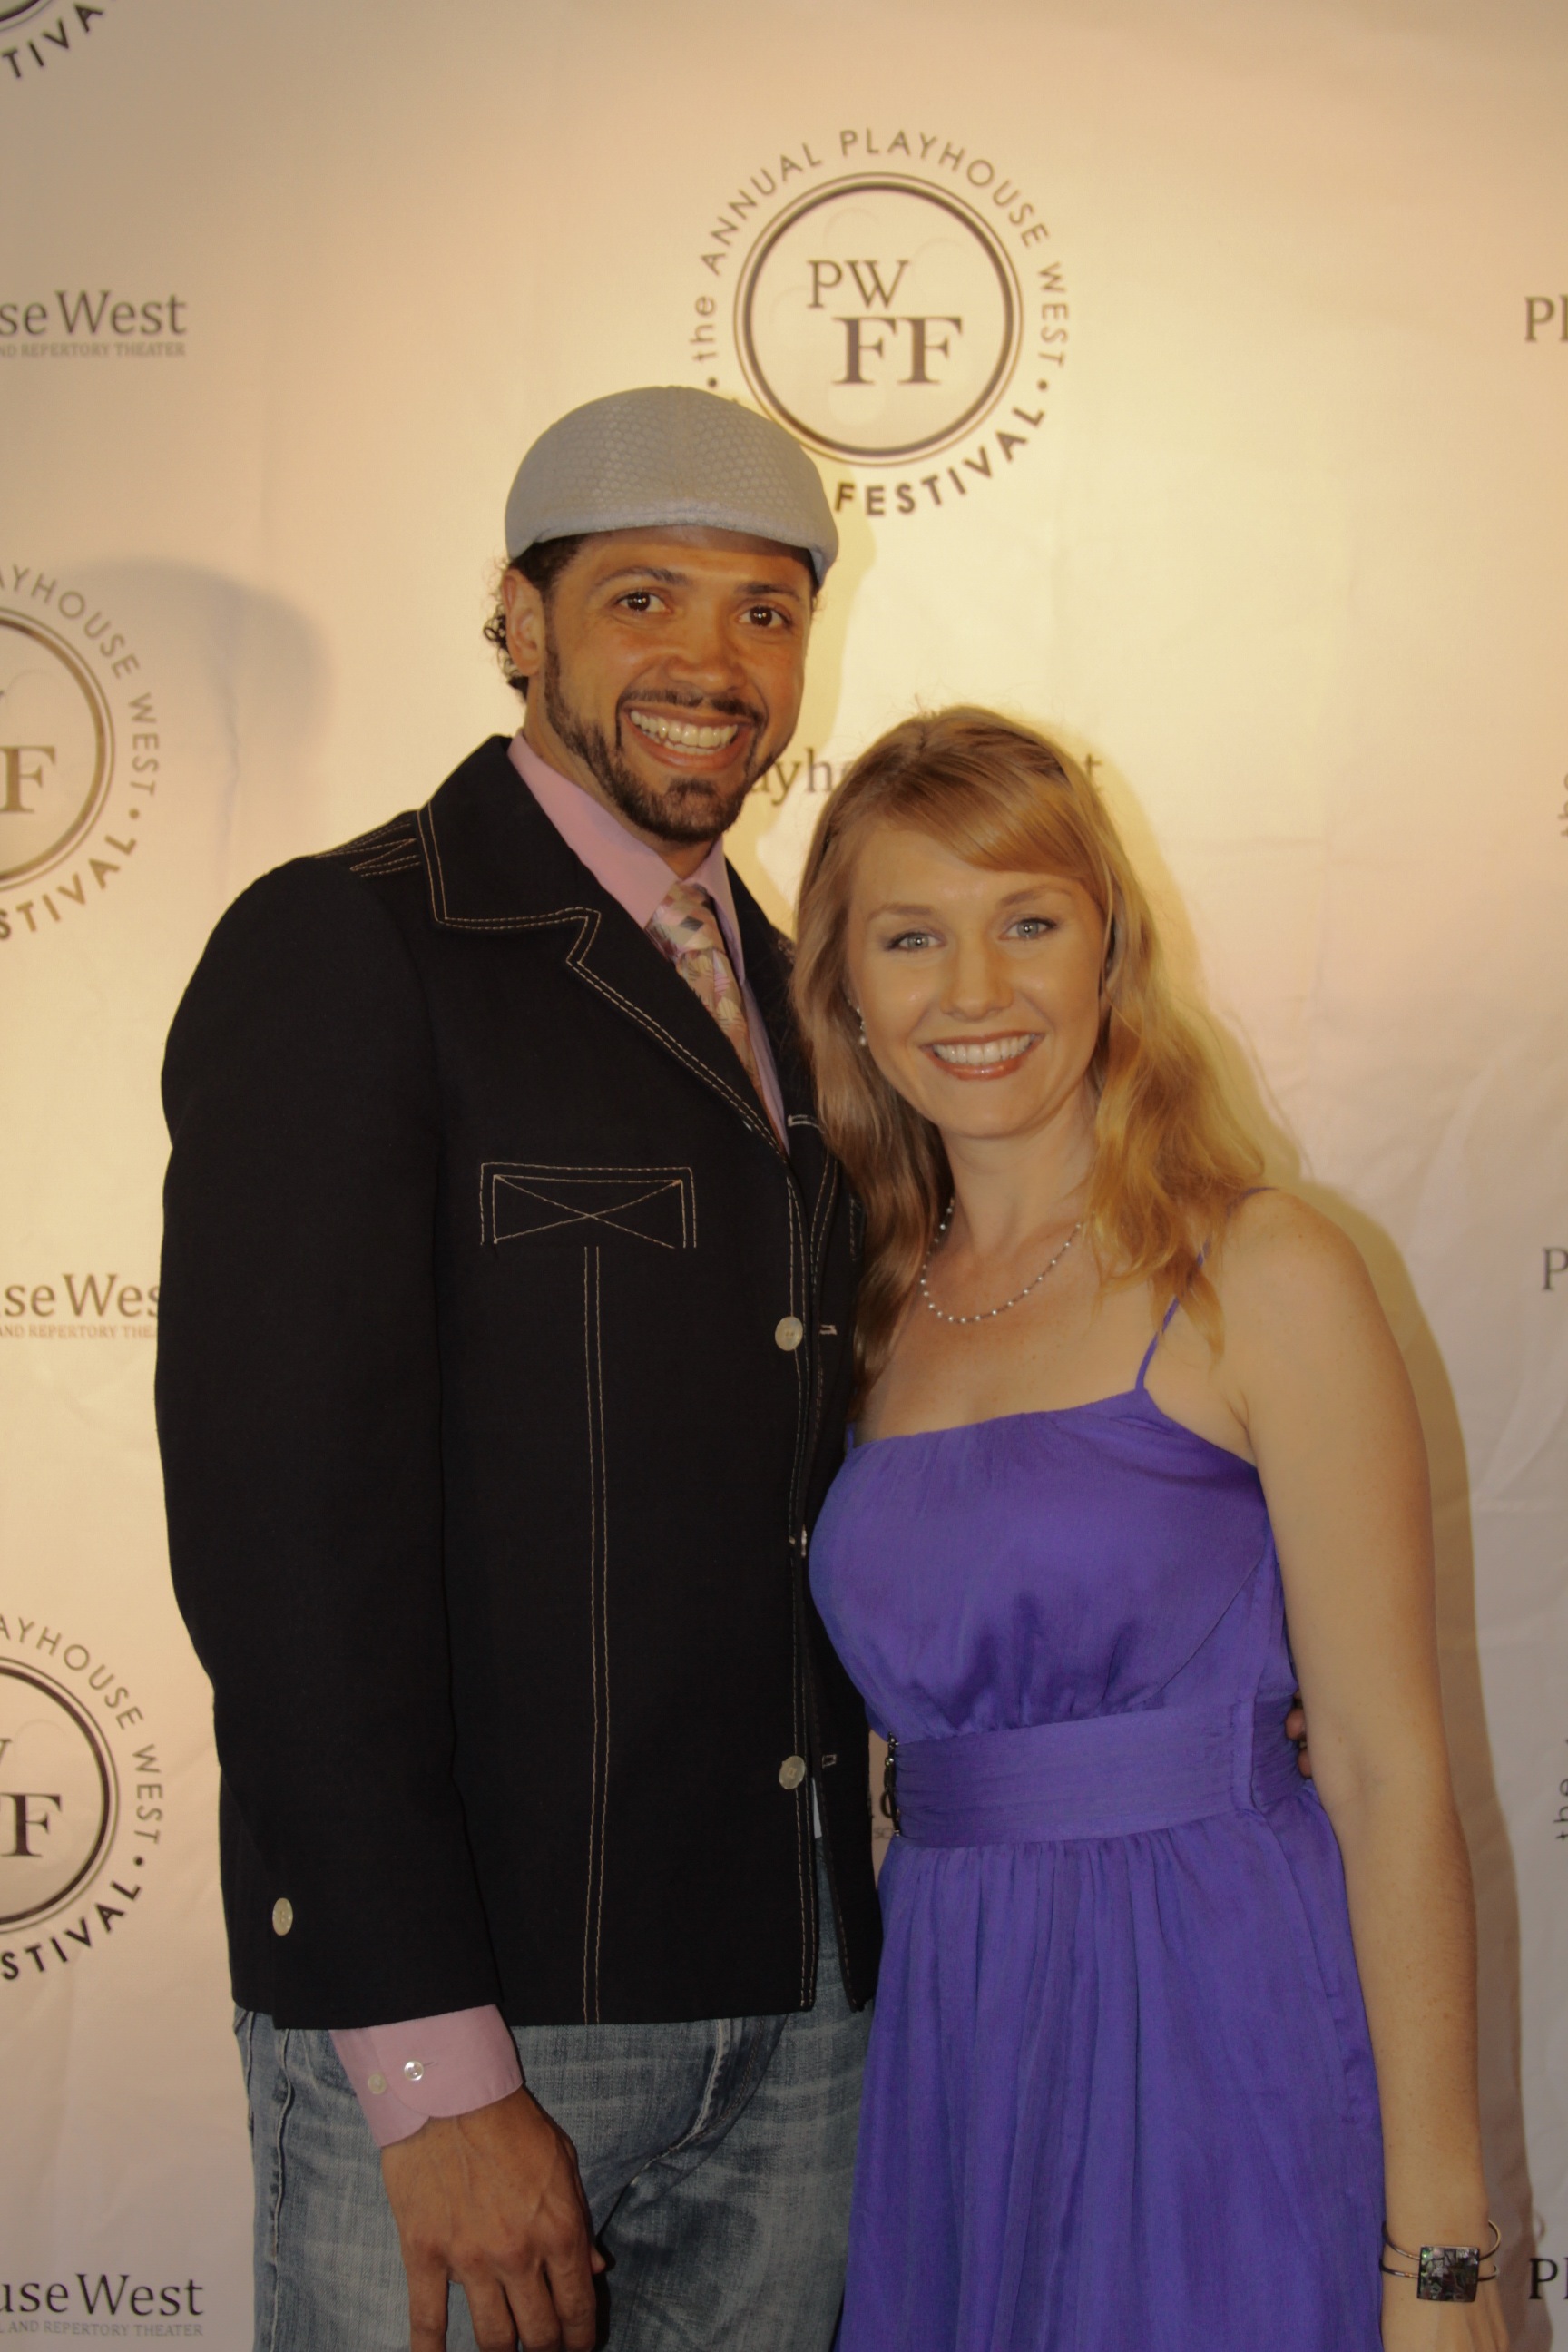 Michelle Coyle and William Gabriel Grier on the Red Carpet at the Playhouse West Film Festival.